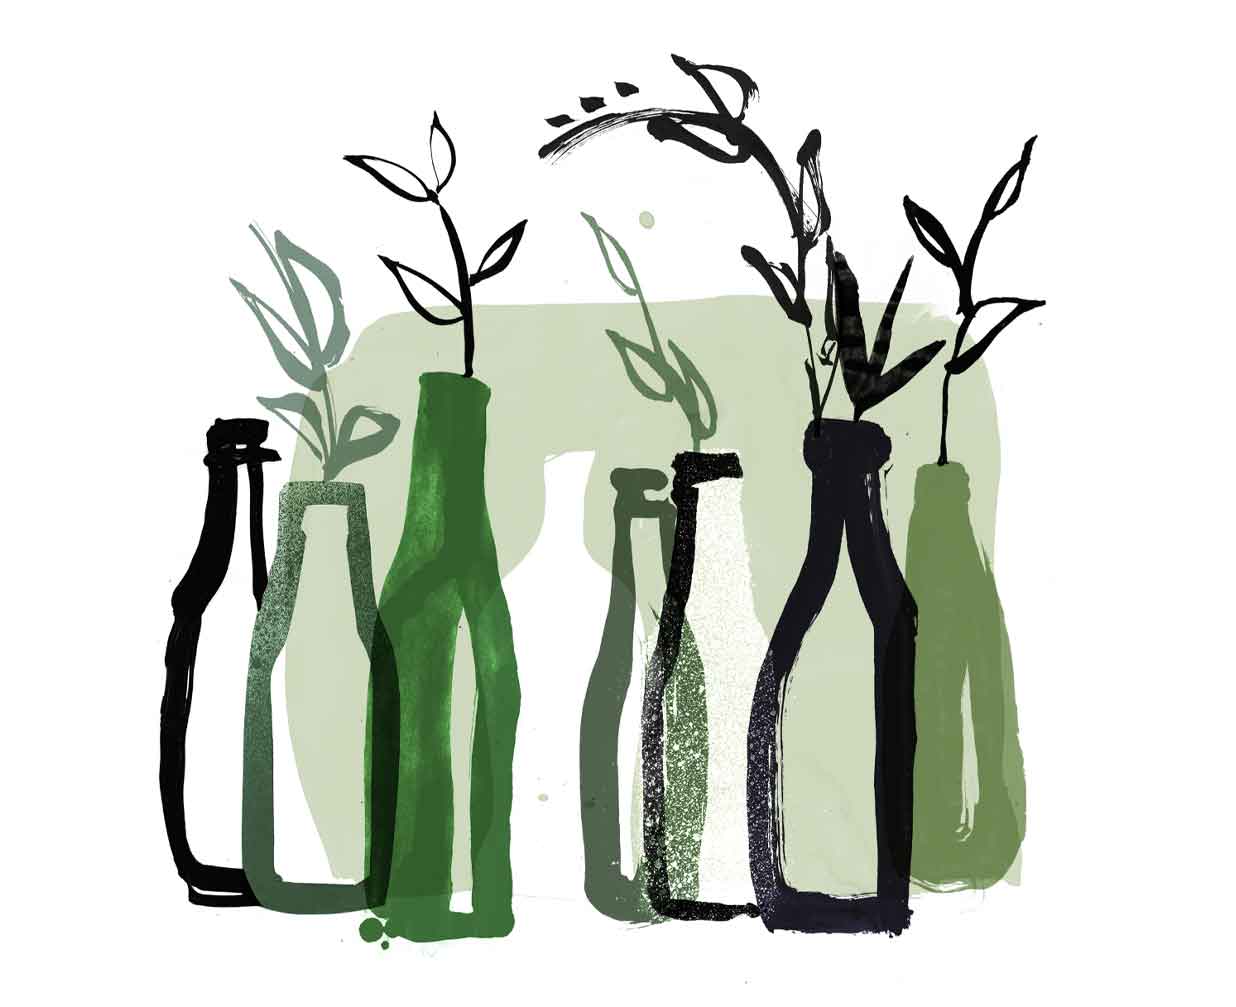 Hand painted linear style illustration of green bottles in a line. Used as vases. A mixture of line and blocks of colour.